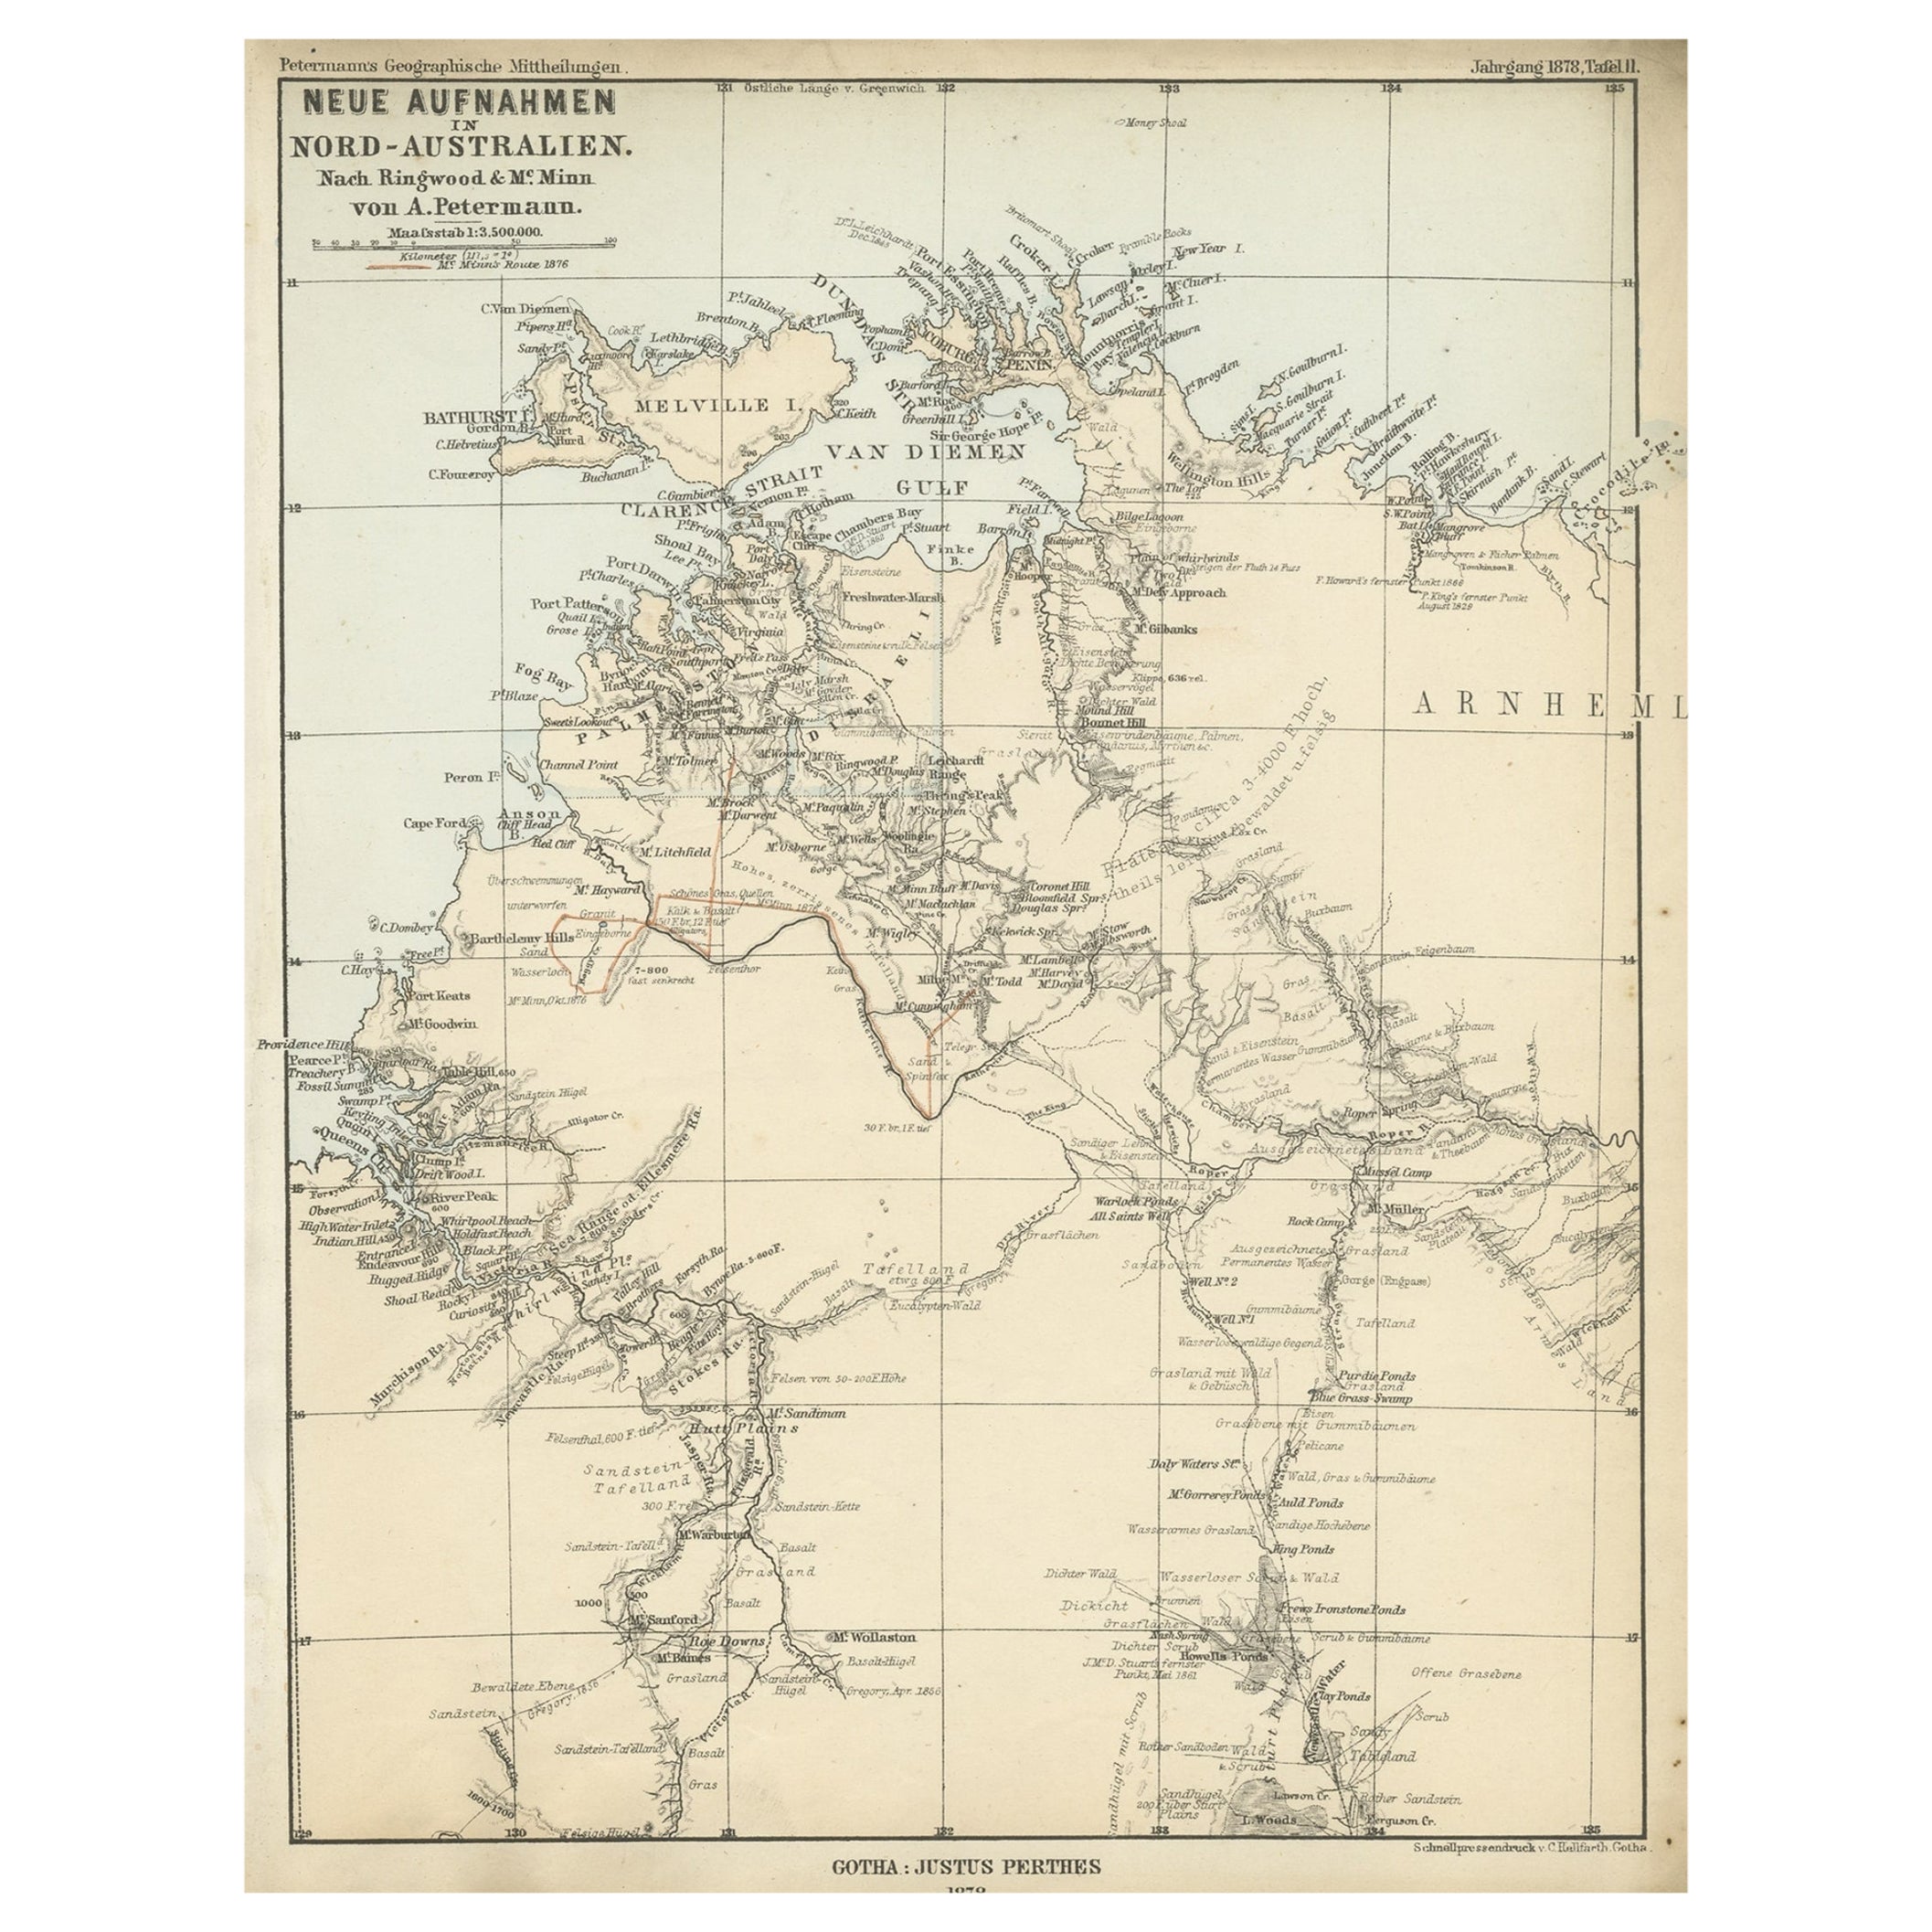 Northern Australia Map with The Routes of Explorers Ringwood and McMinn, 1878